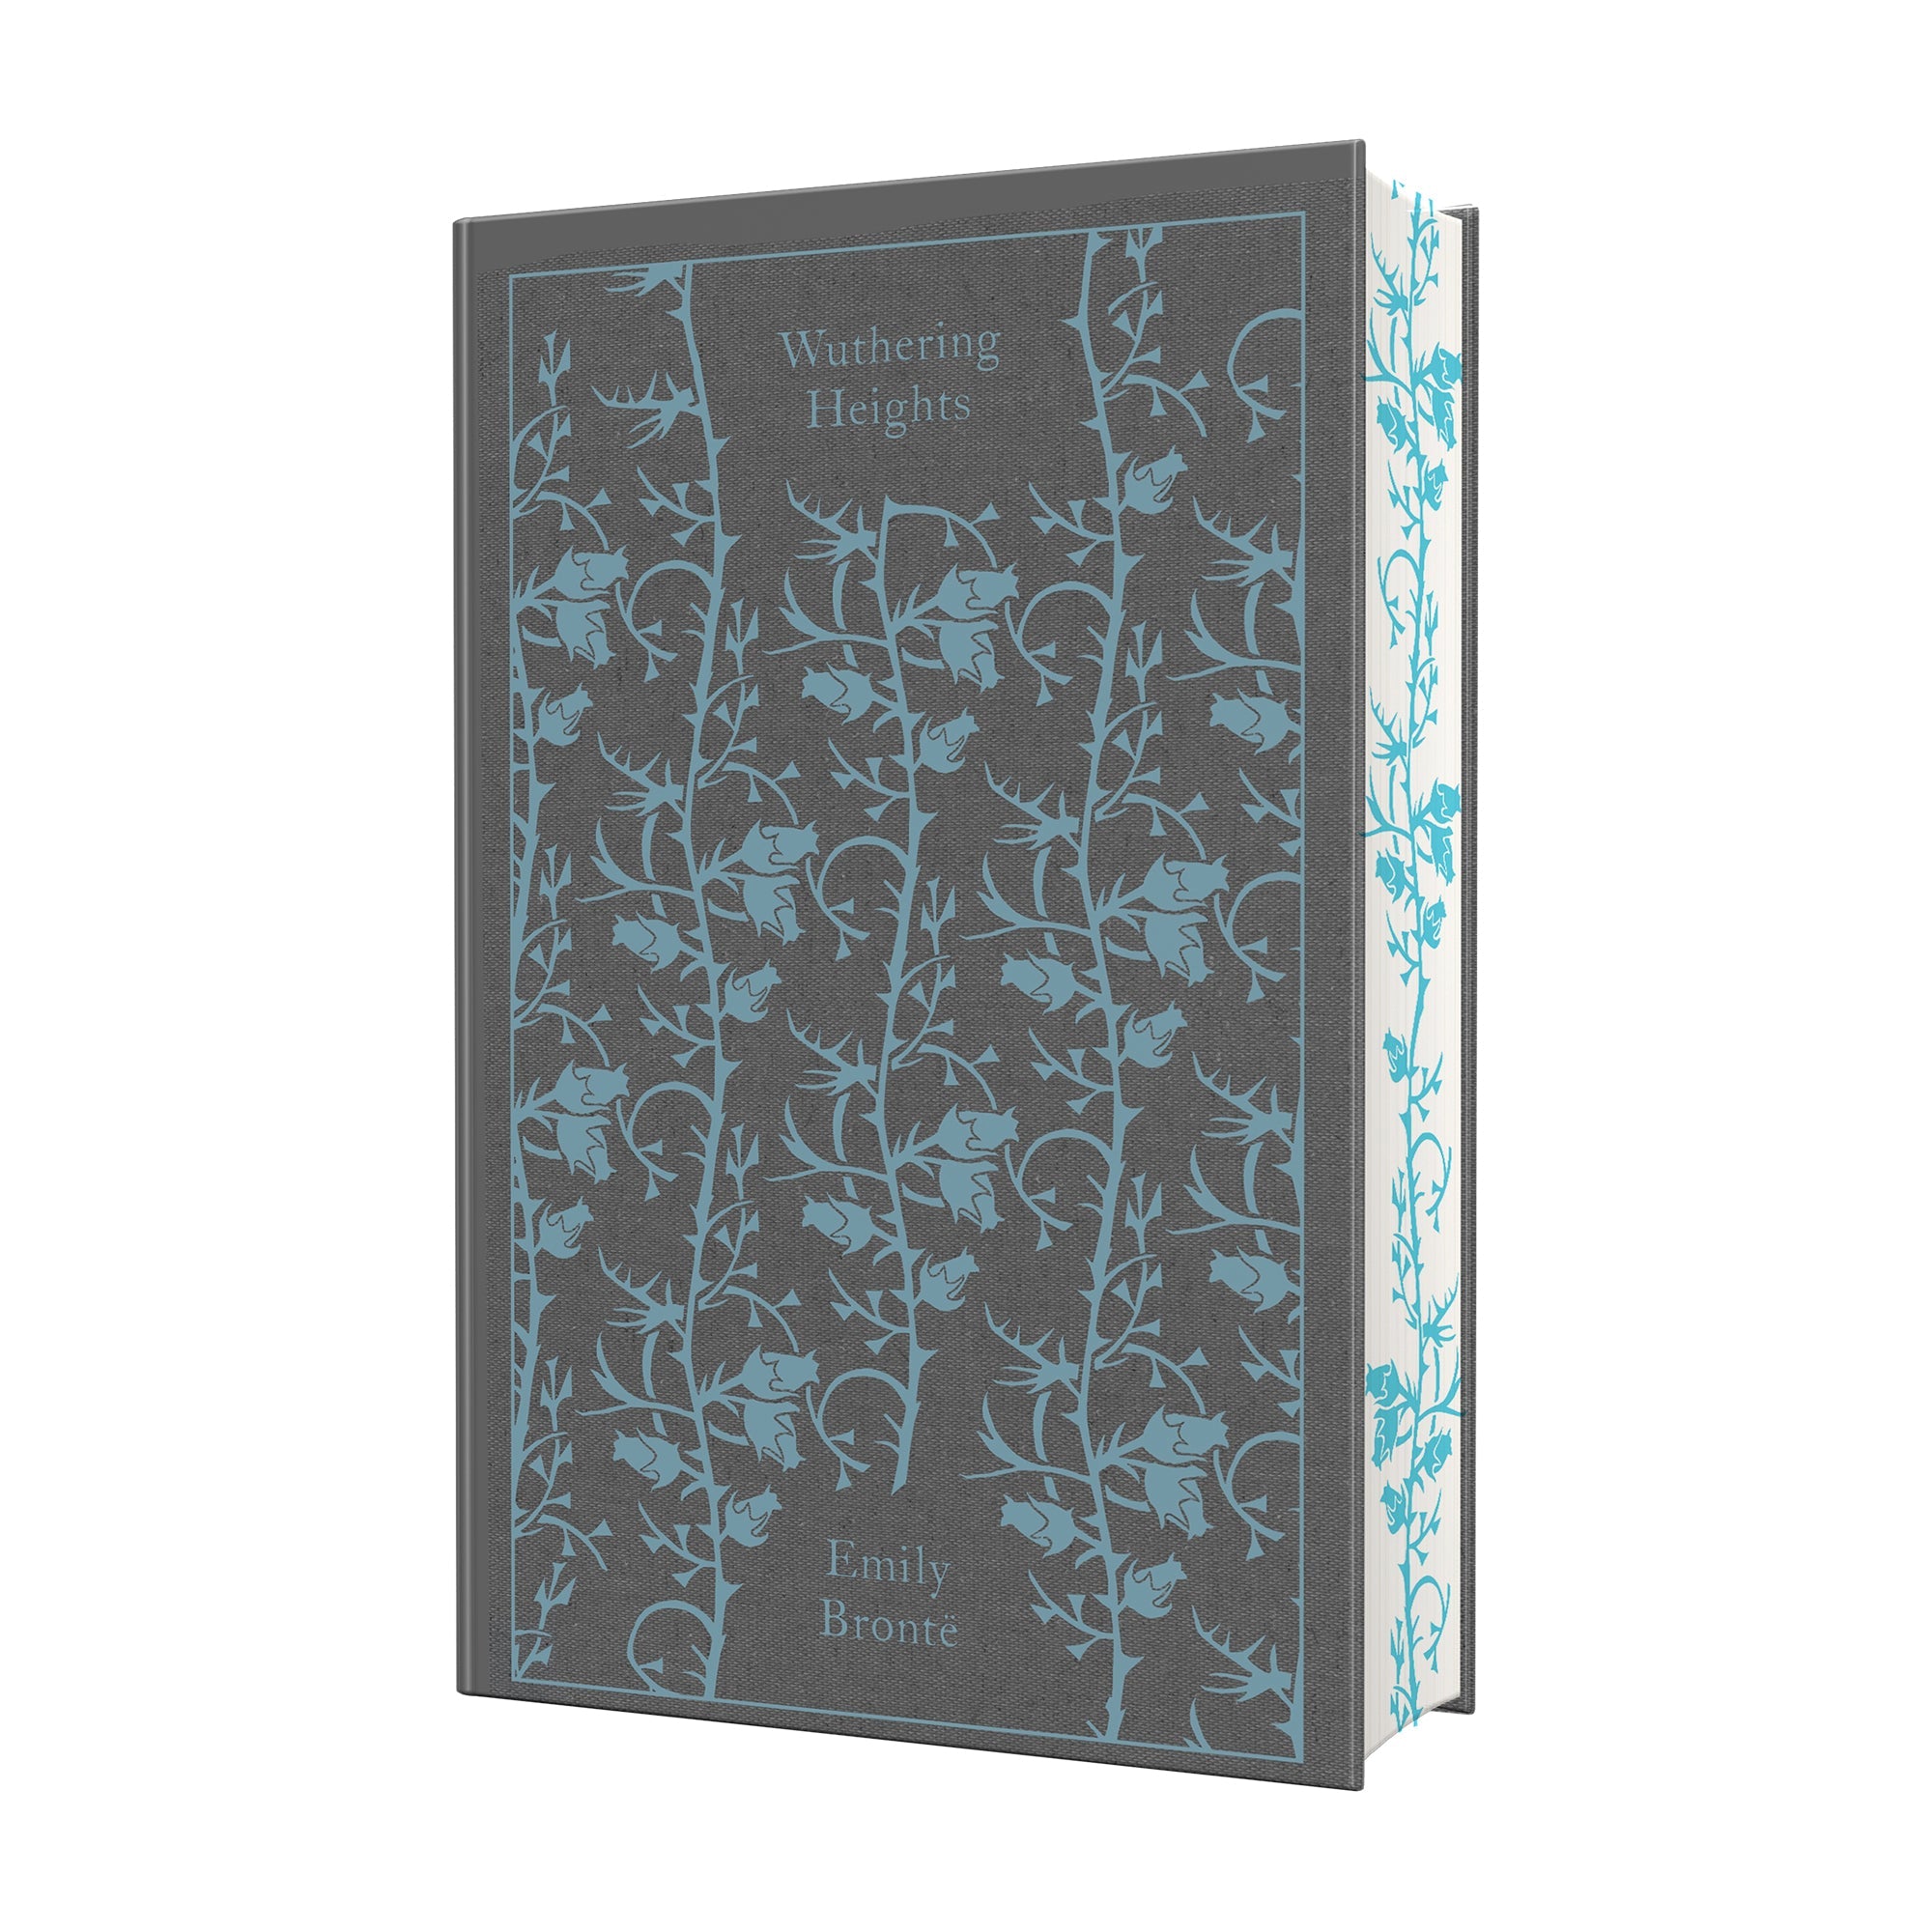 EMILY BRONTE’S WUTHERING HEIGHTS: LIMITED EDITION